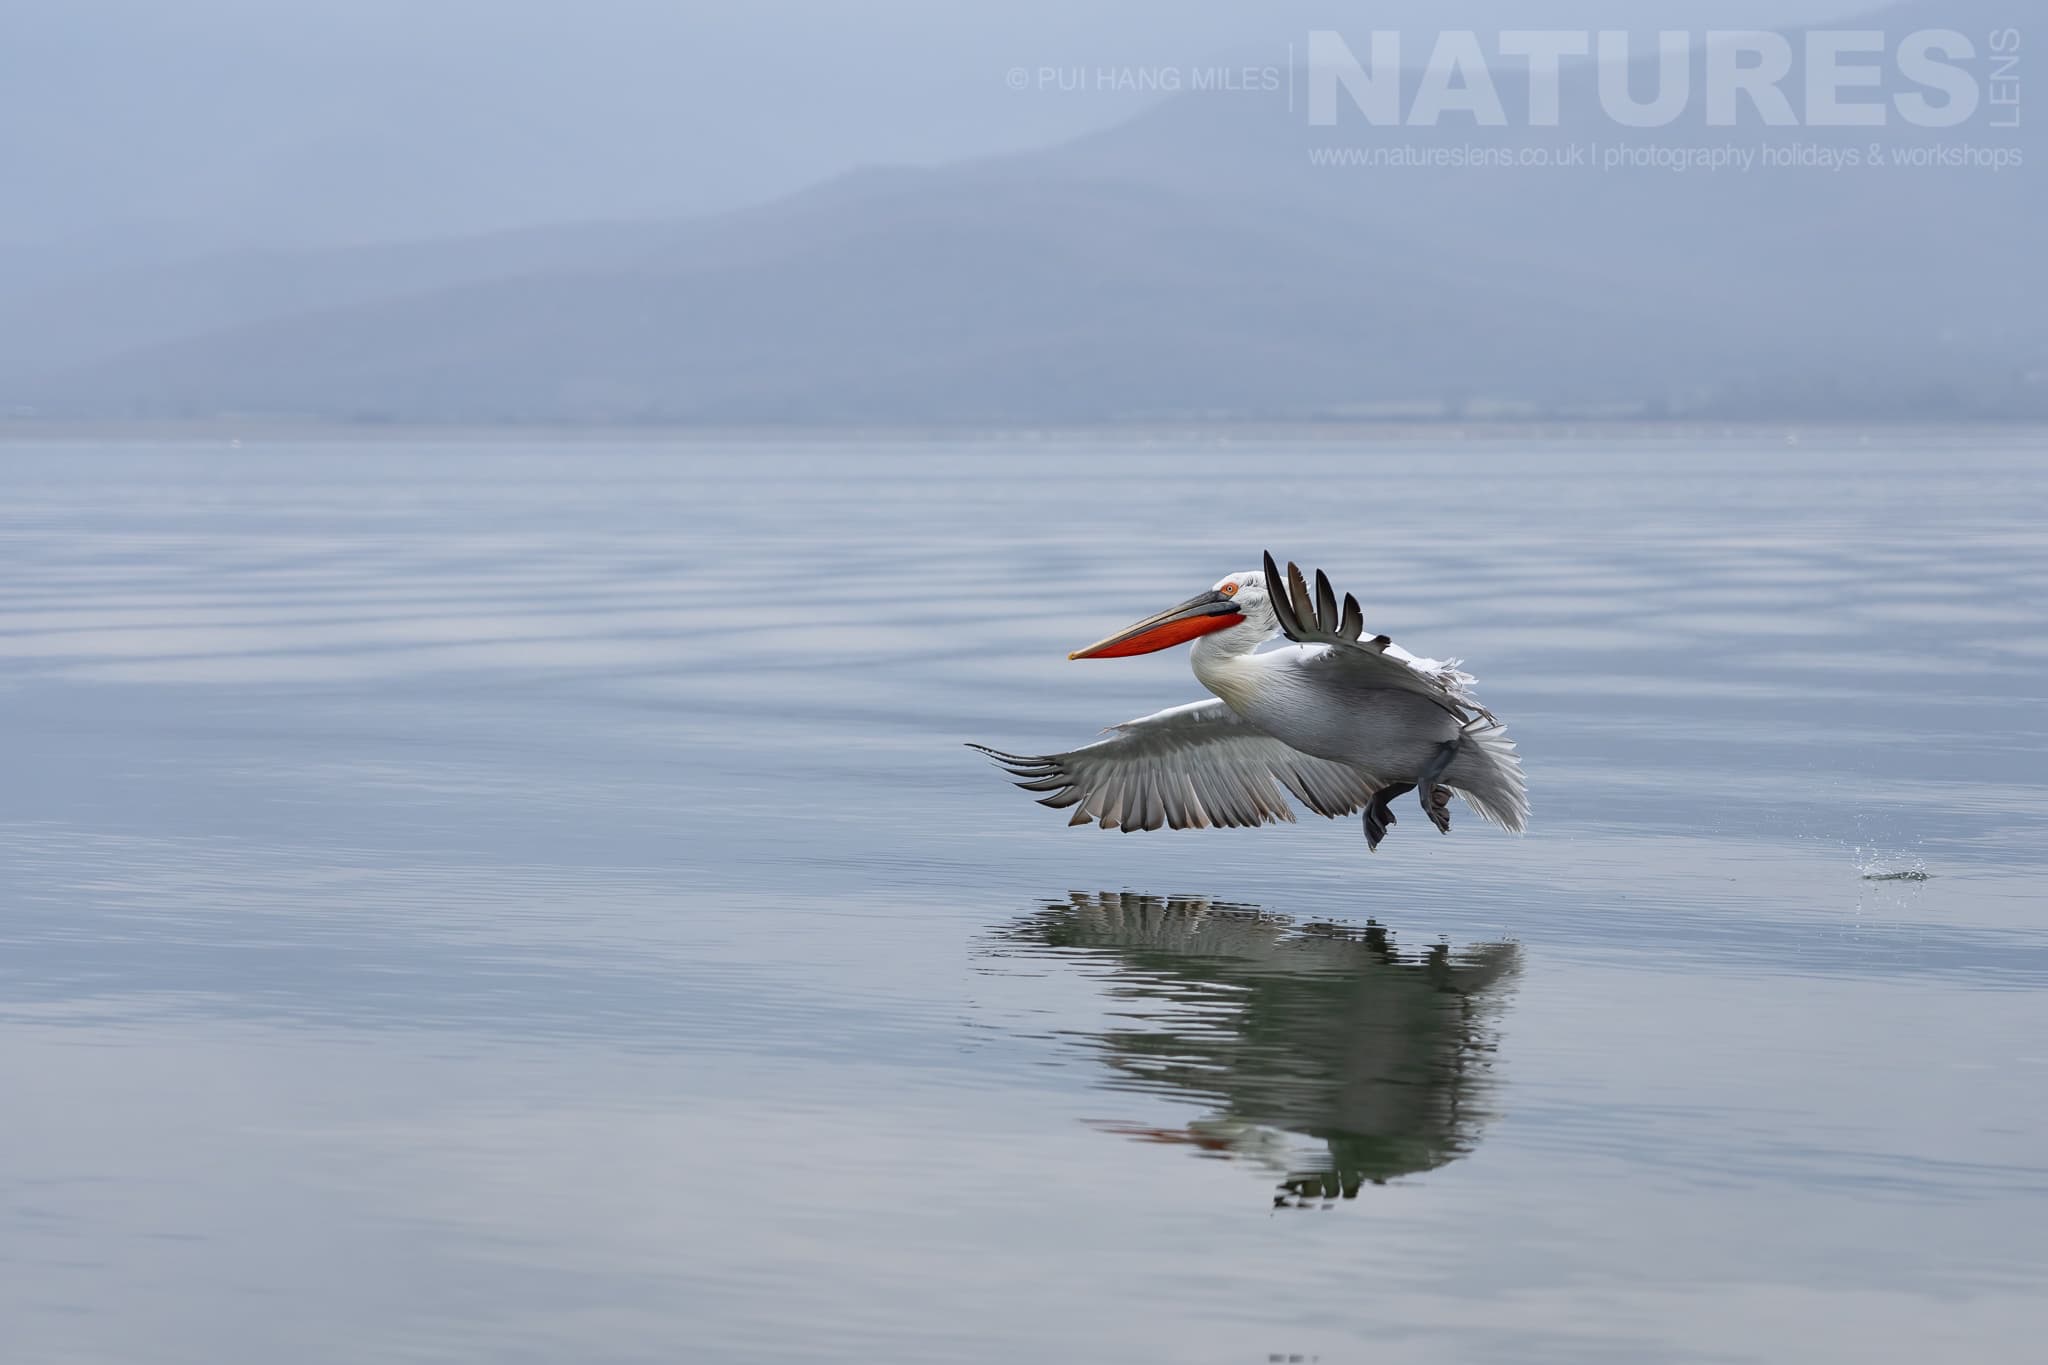 One Of The Pelicans Of Lake Kerkini Flies Over The Waters Of The Lake Photographed During A Natureslens Pelicans Of Lake Kerkini Photography Holiday